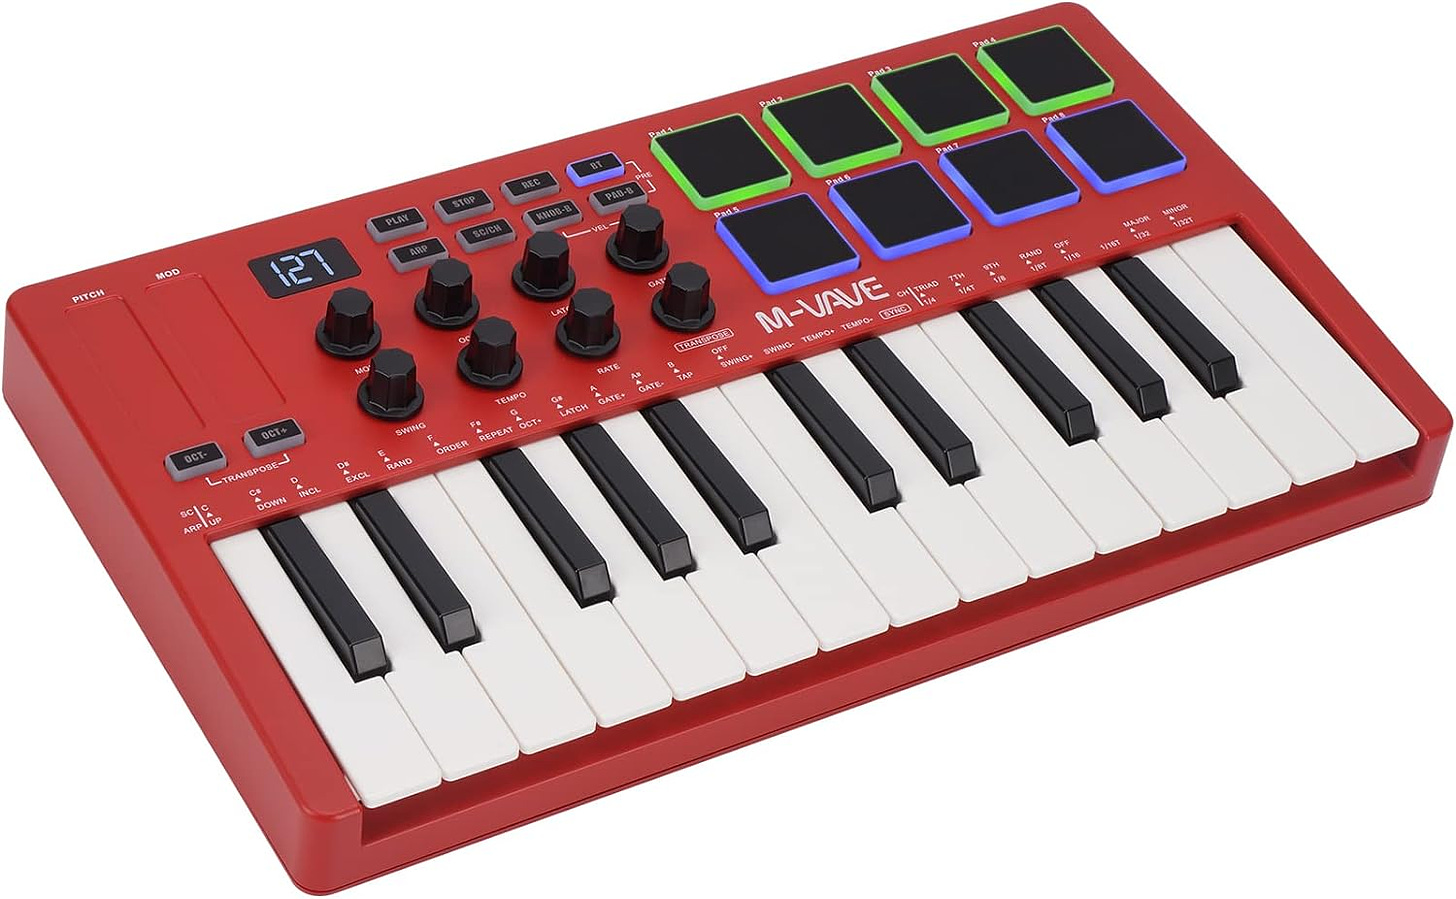 M-Wave USB MIDI controller. No, it doesn't produce sounds by itself. (Credit: amazon.com)